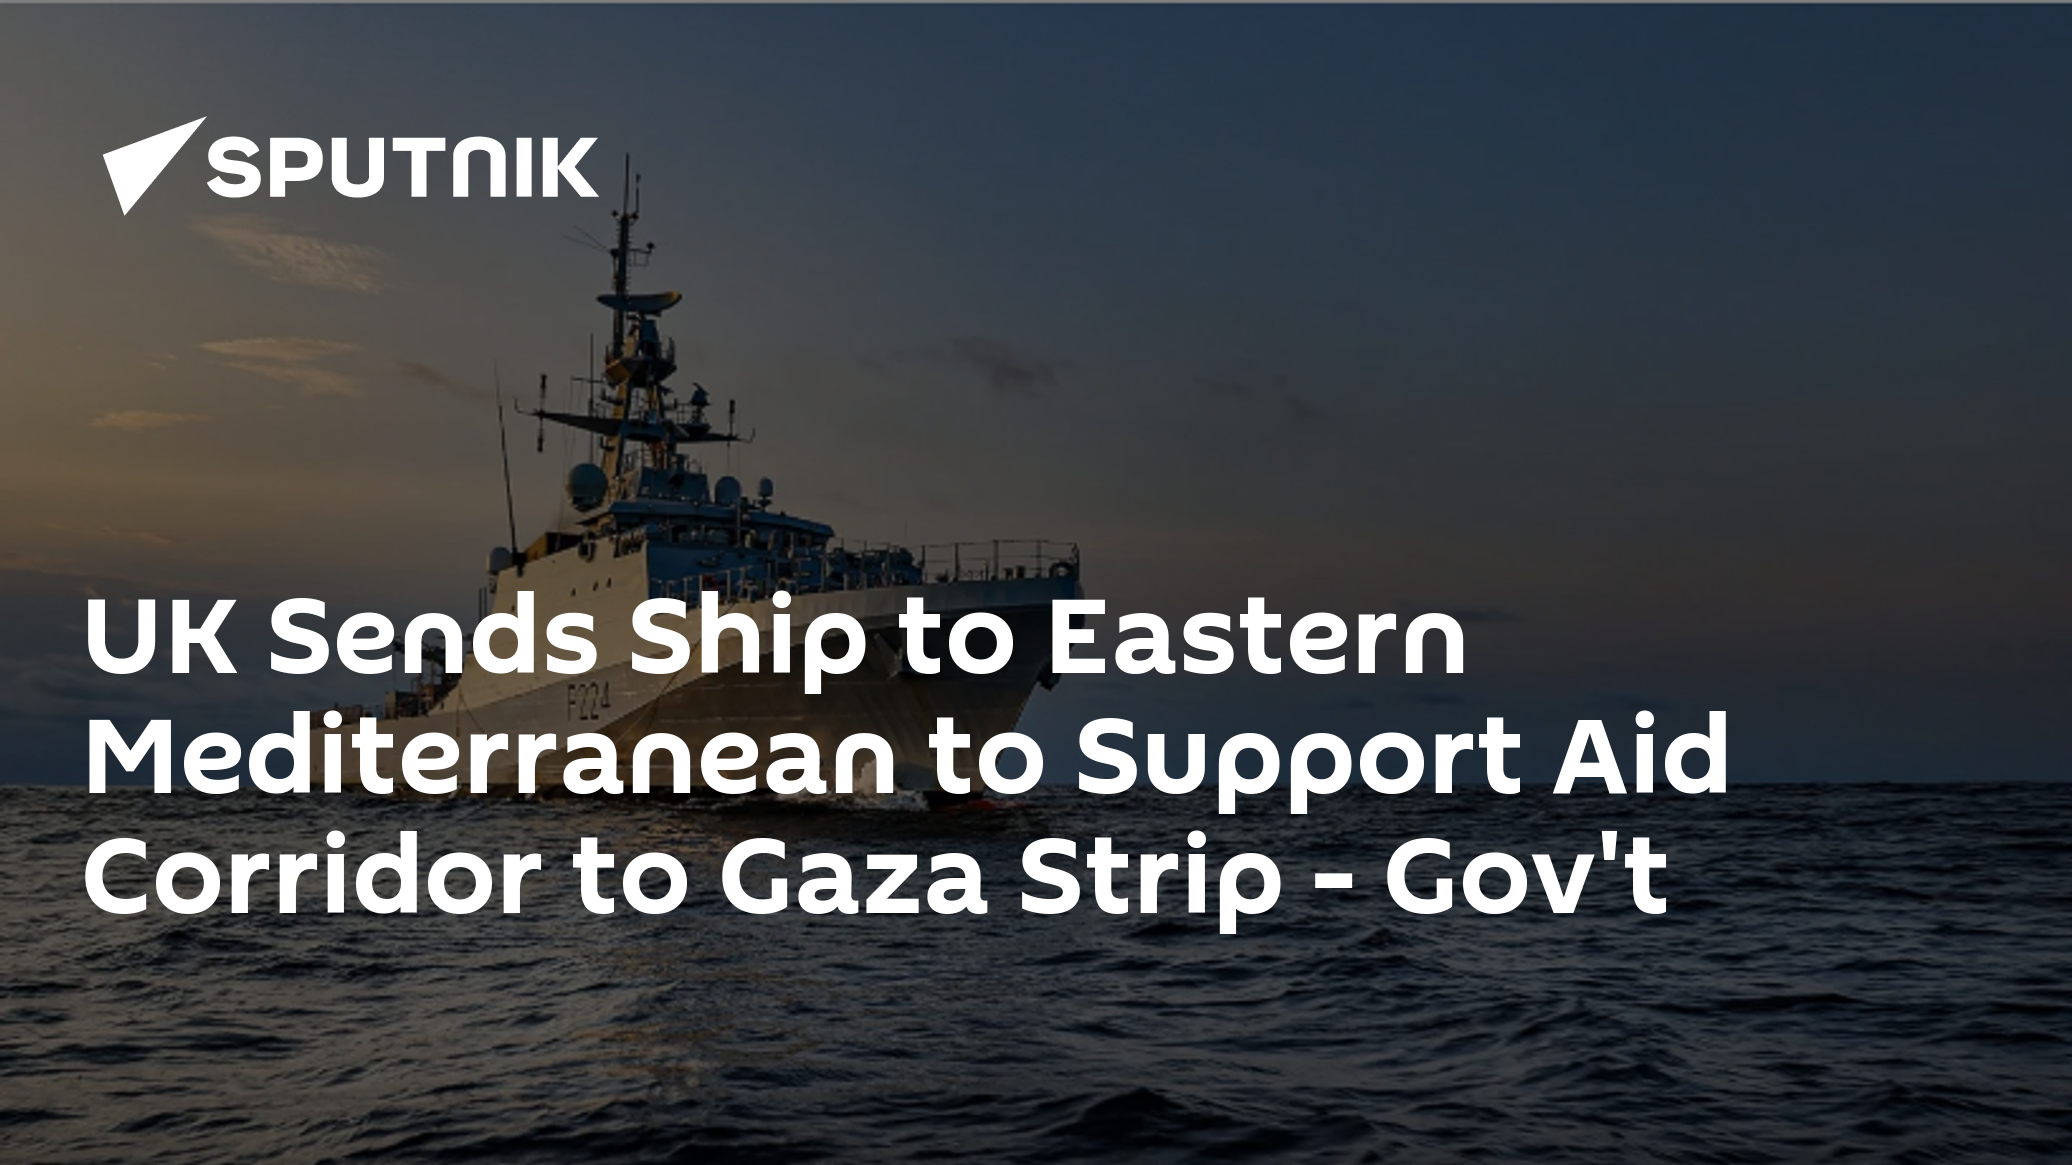 UK Sends Ship to Eastern Mediterranean to Support Aid Corridor to Gaza Strip - Gov't